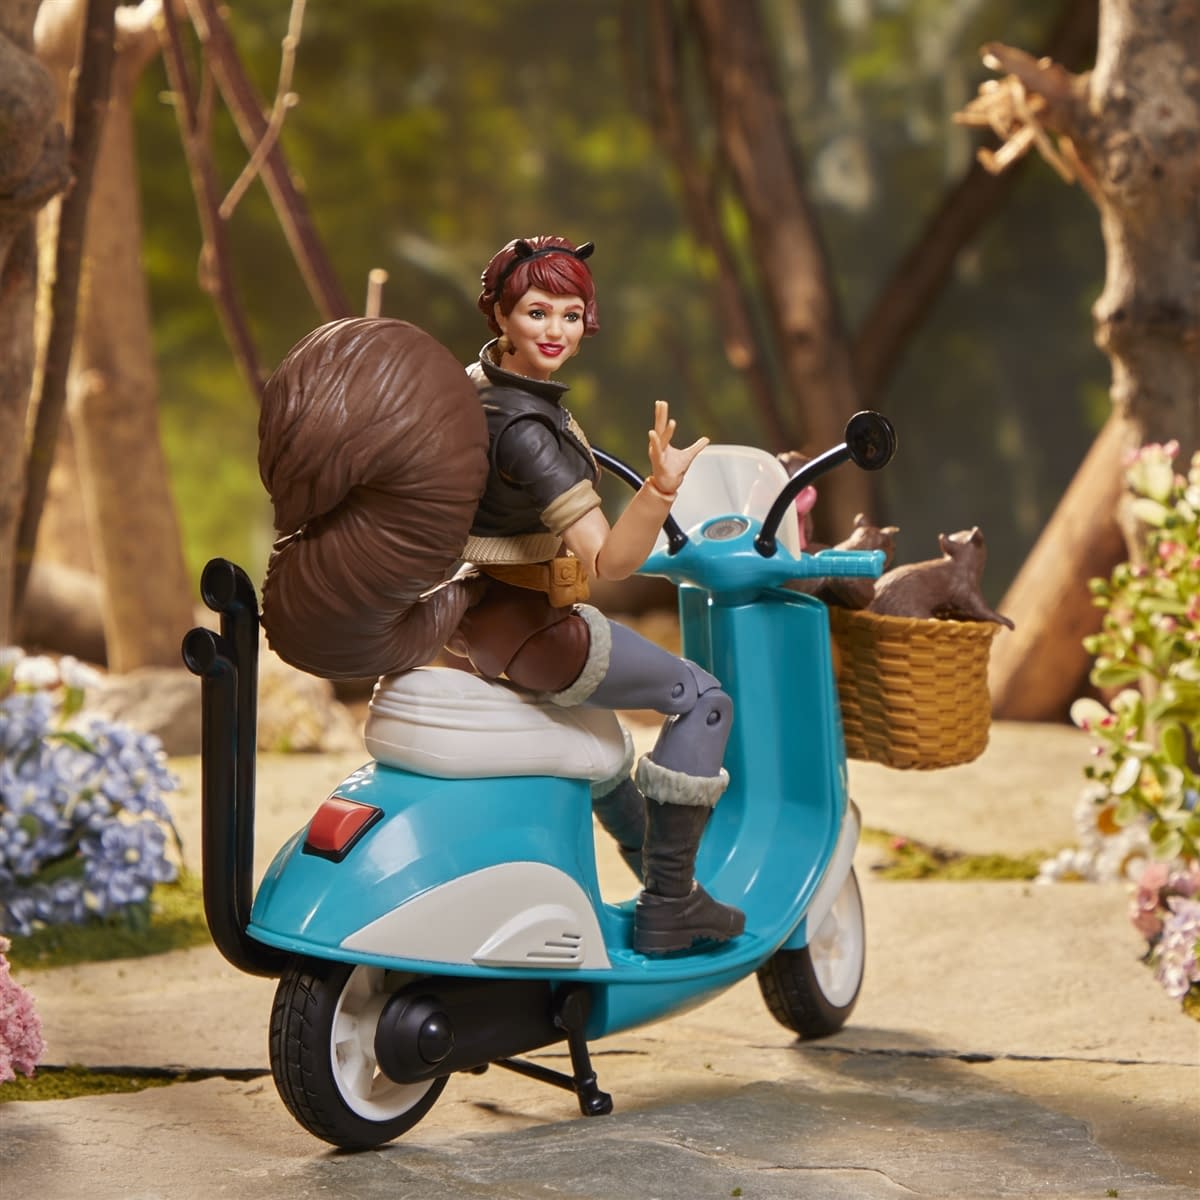 Marvel Legends Cosmic Ghost Rider and Squirrel Girl Available Now 